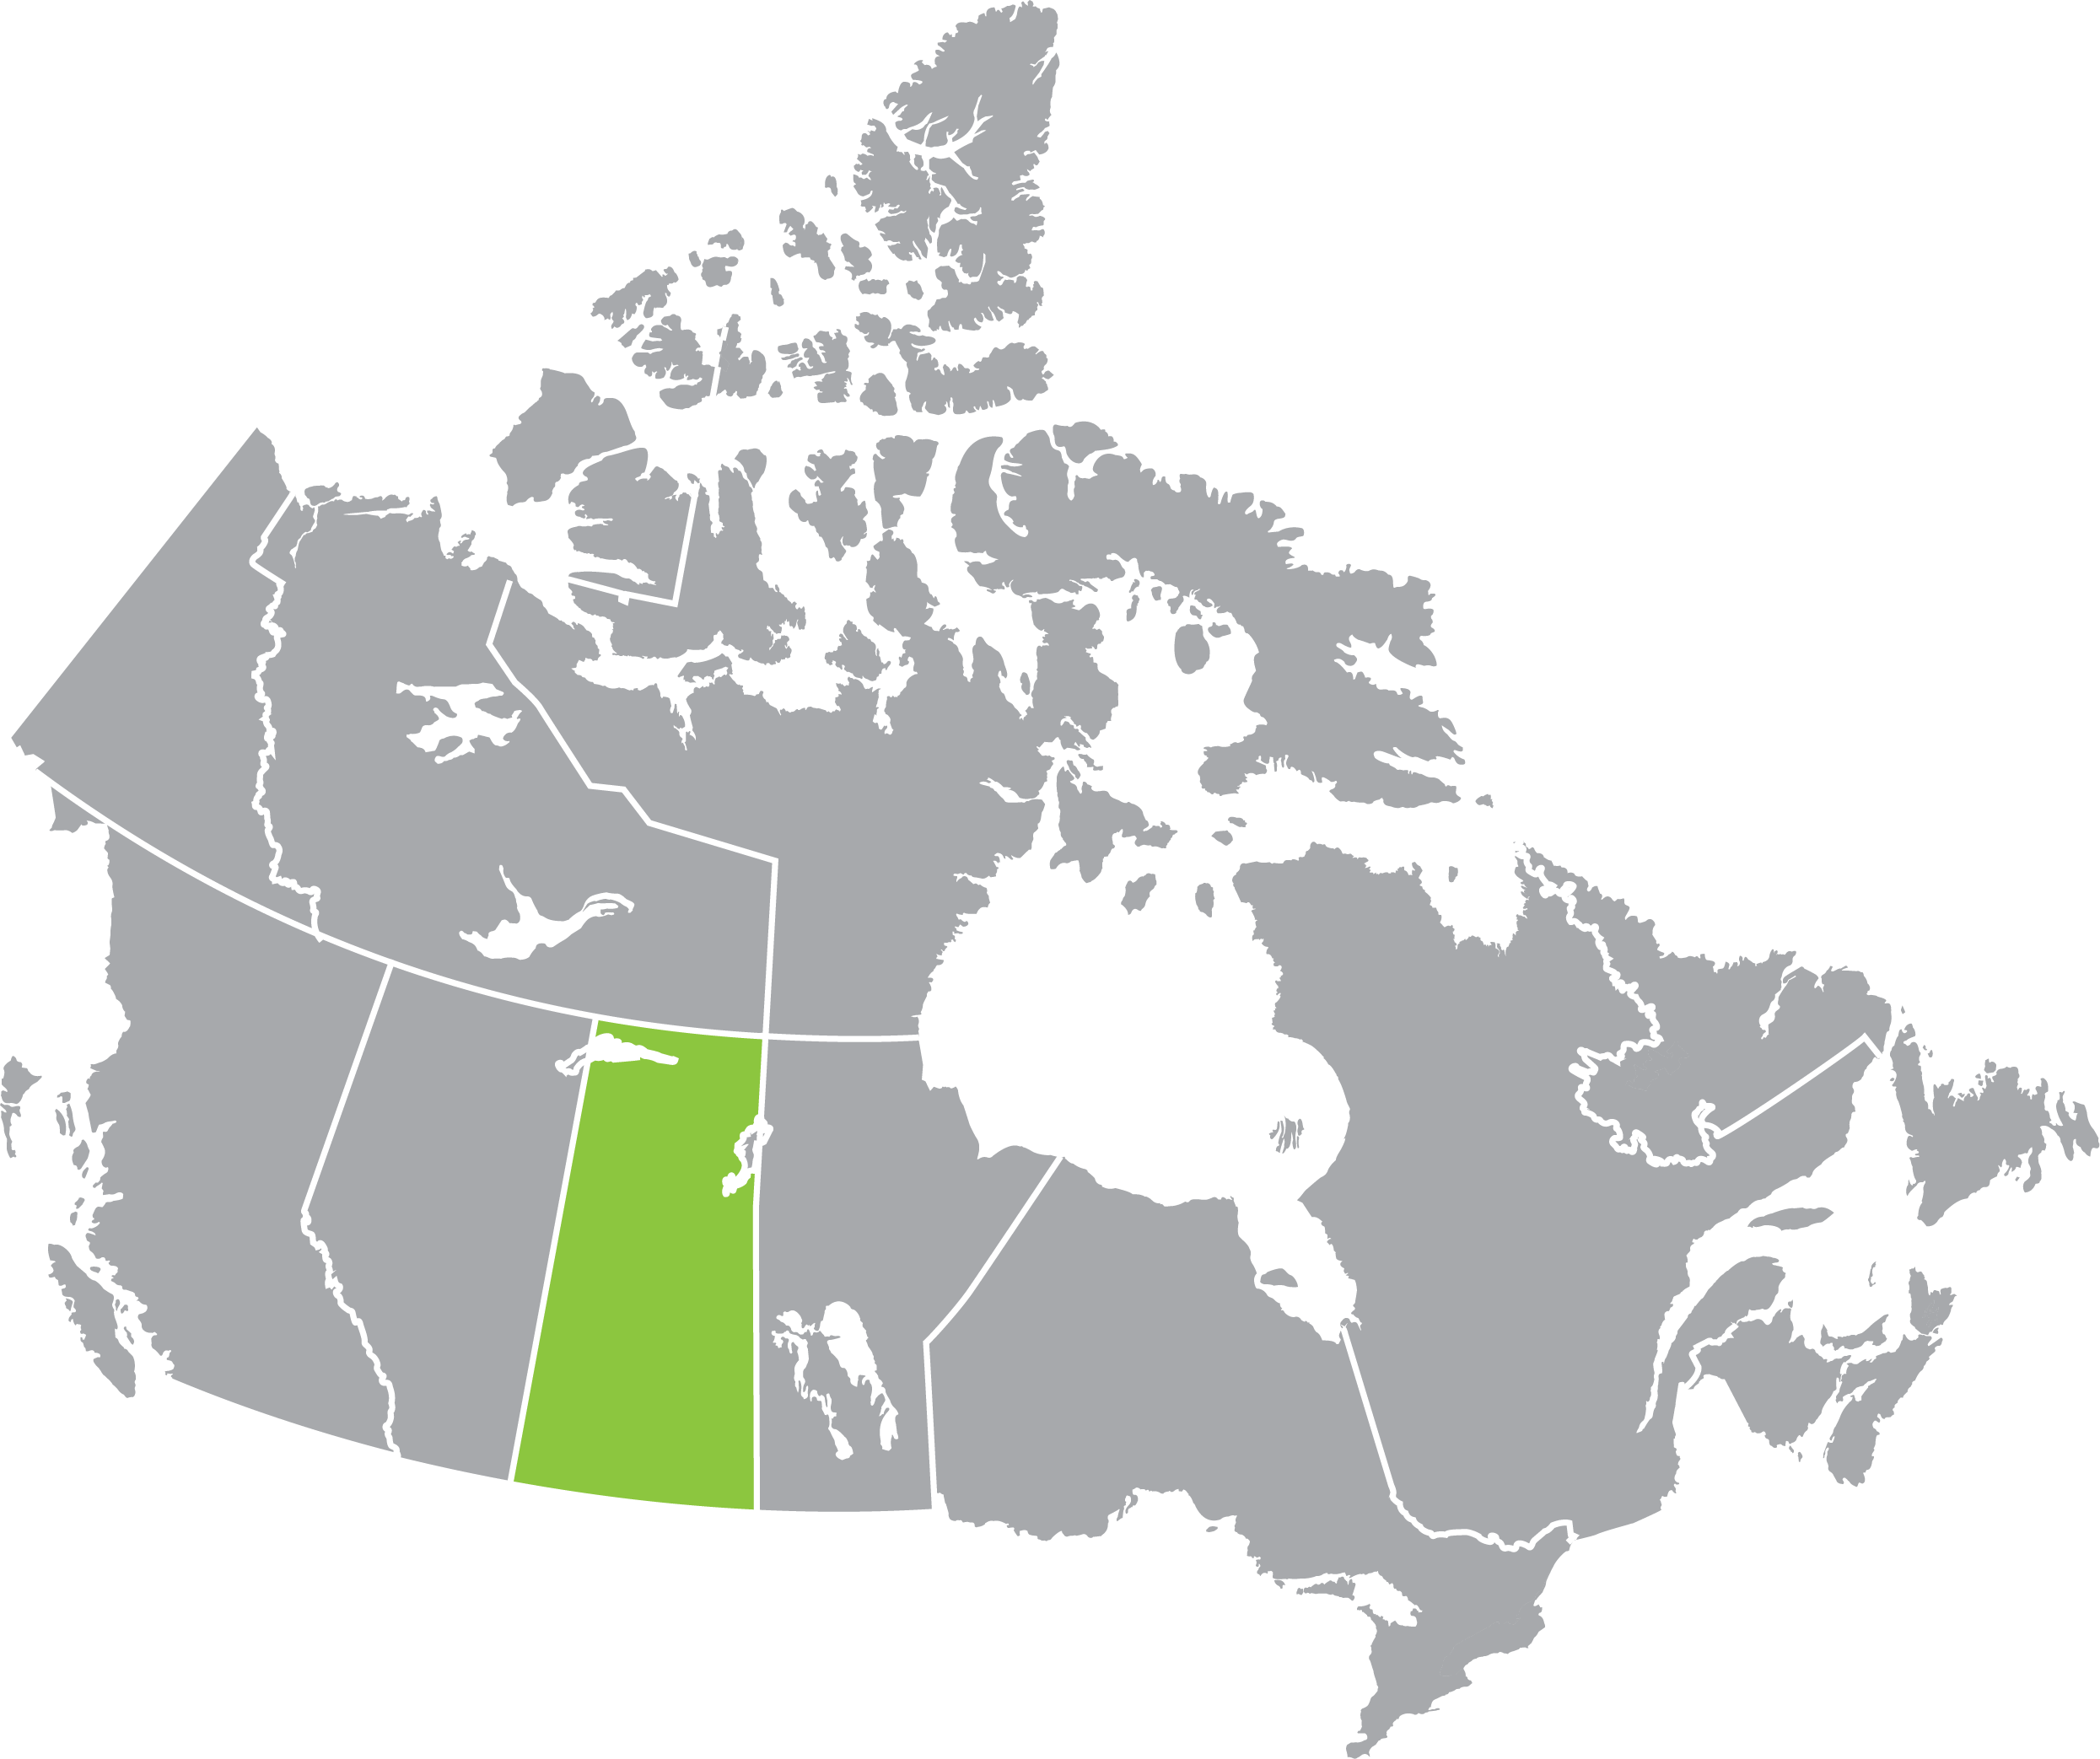 Map of Canada where Saskatchewan is highlighted in green to show it is located in the west part of the country